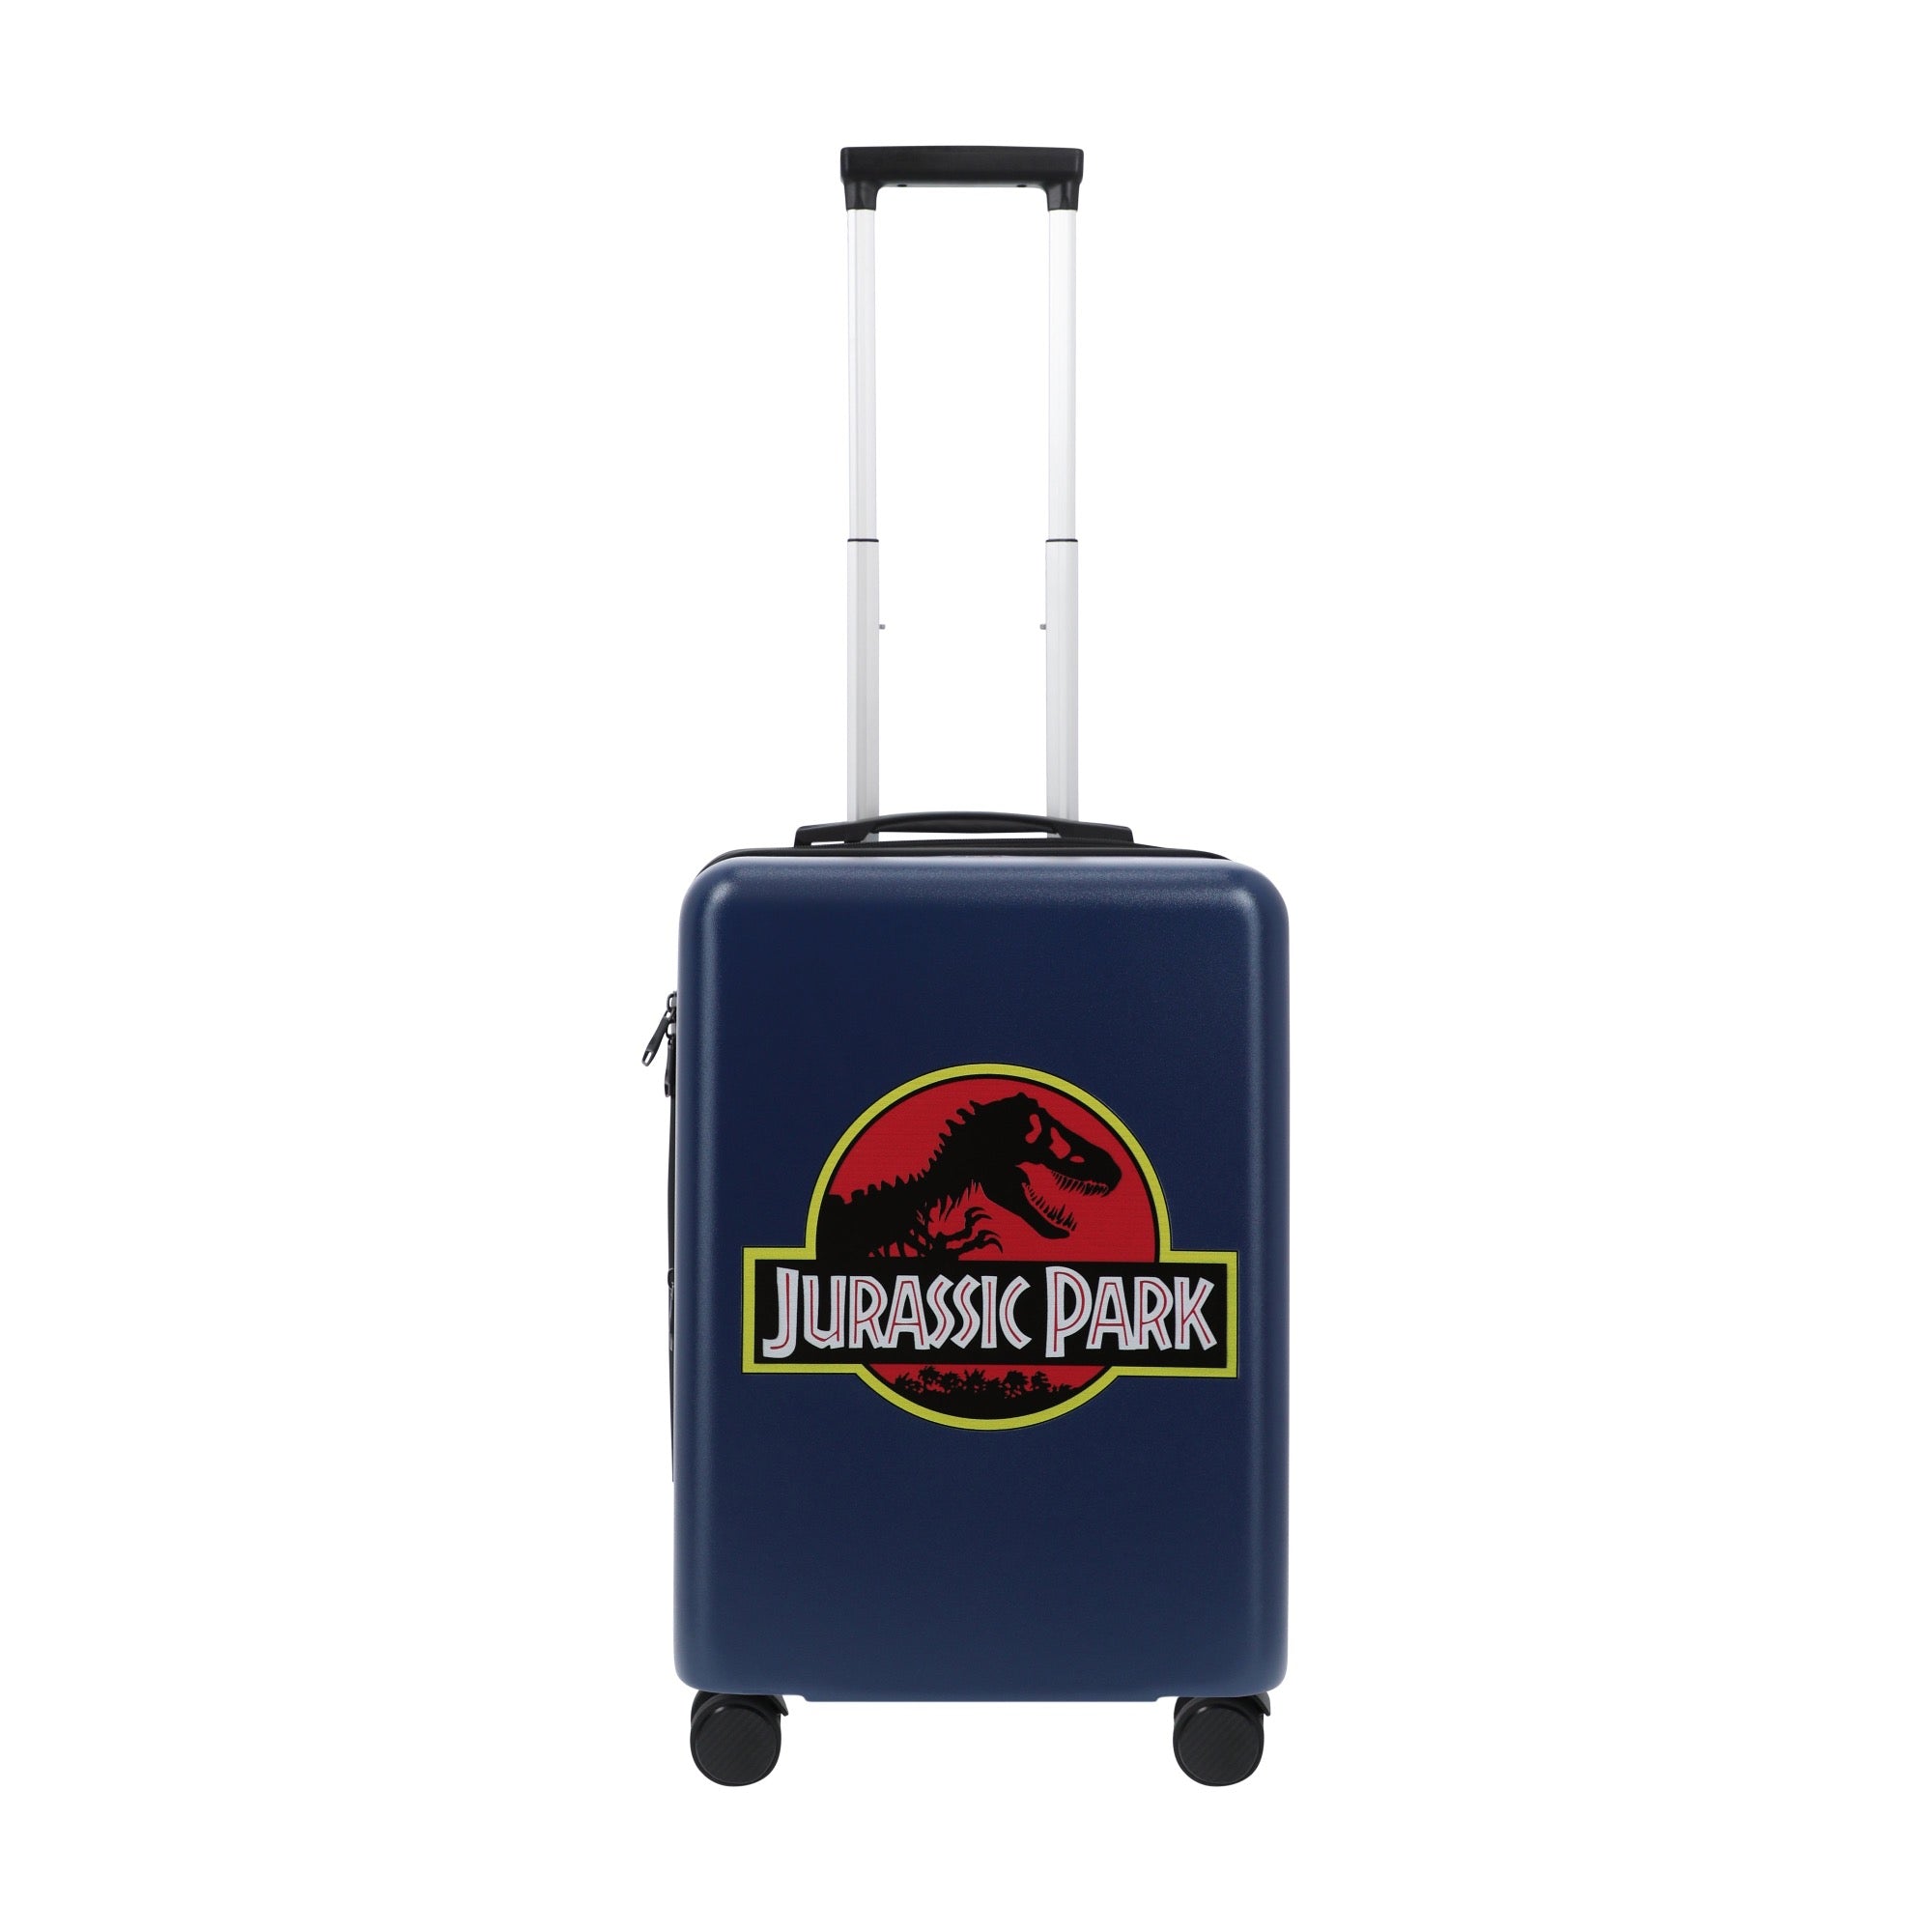 Navy blue NBC studios jurassic park 22.5" carry-on spinner suitcase luggage by Ful